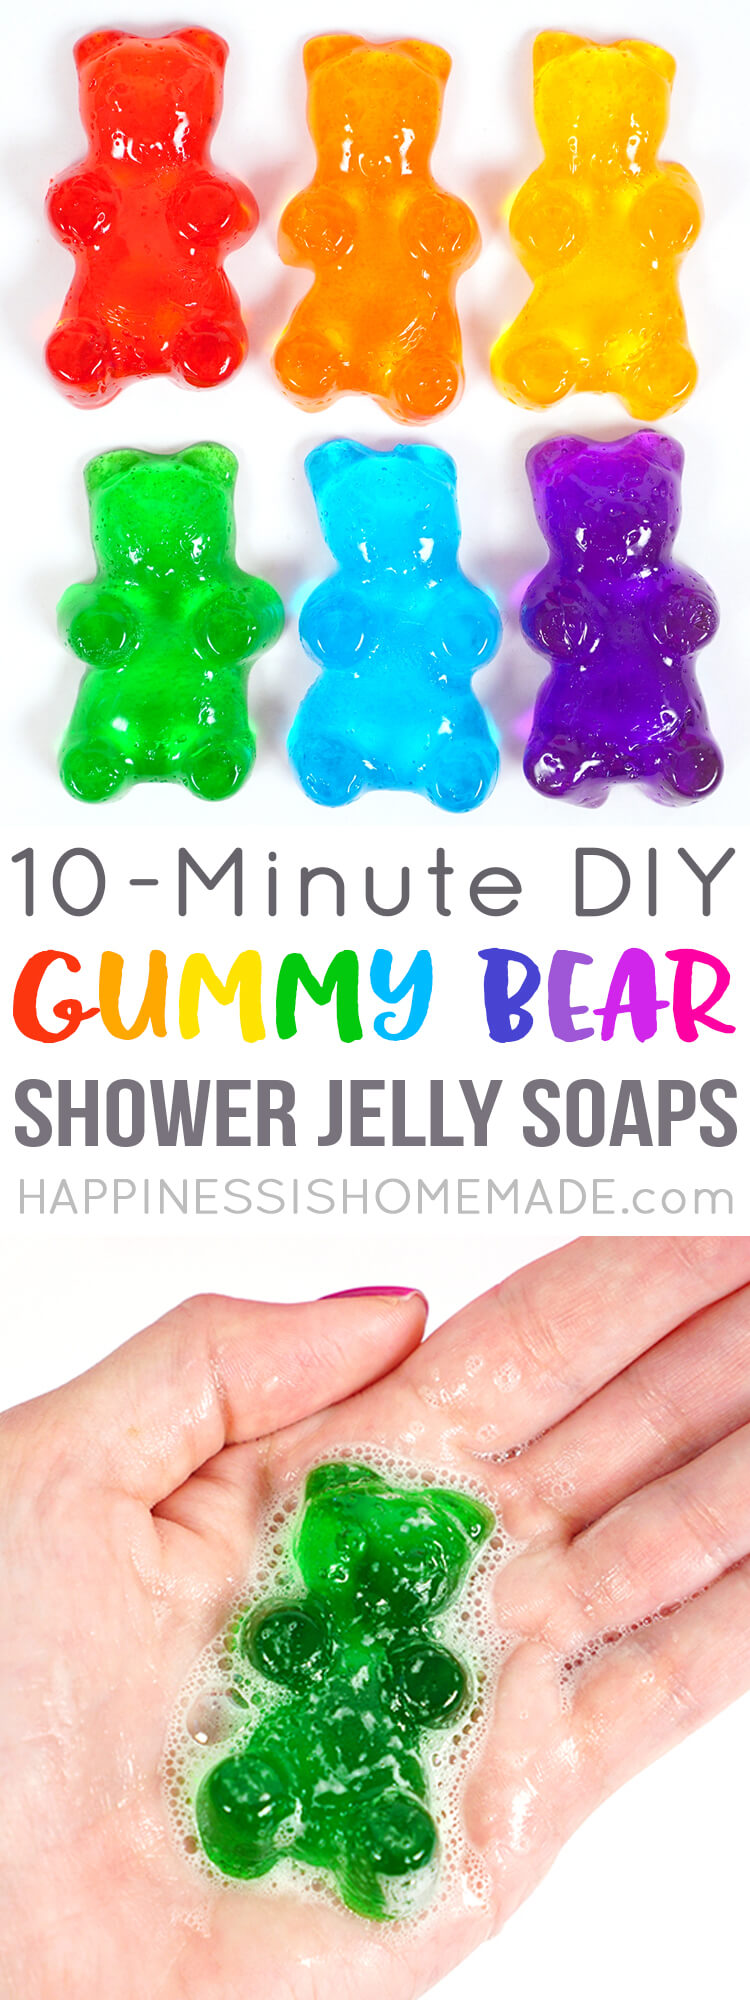 Gummy Bear Shower Jelly Soaps - Happiness is Homemade